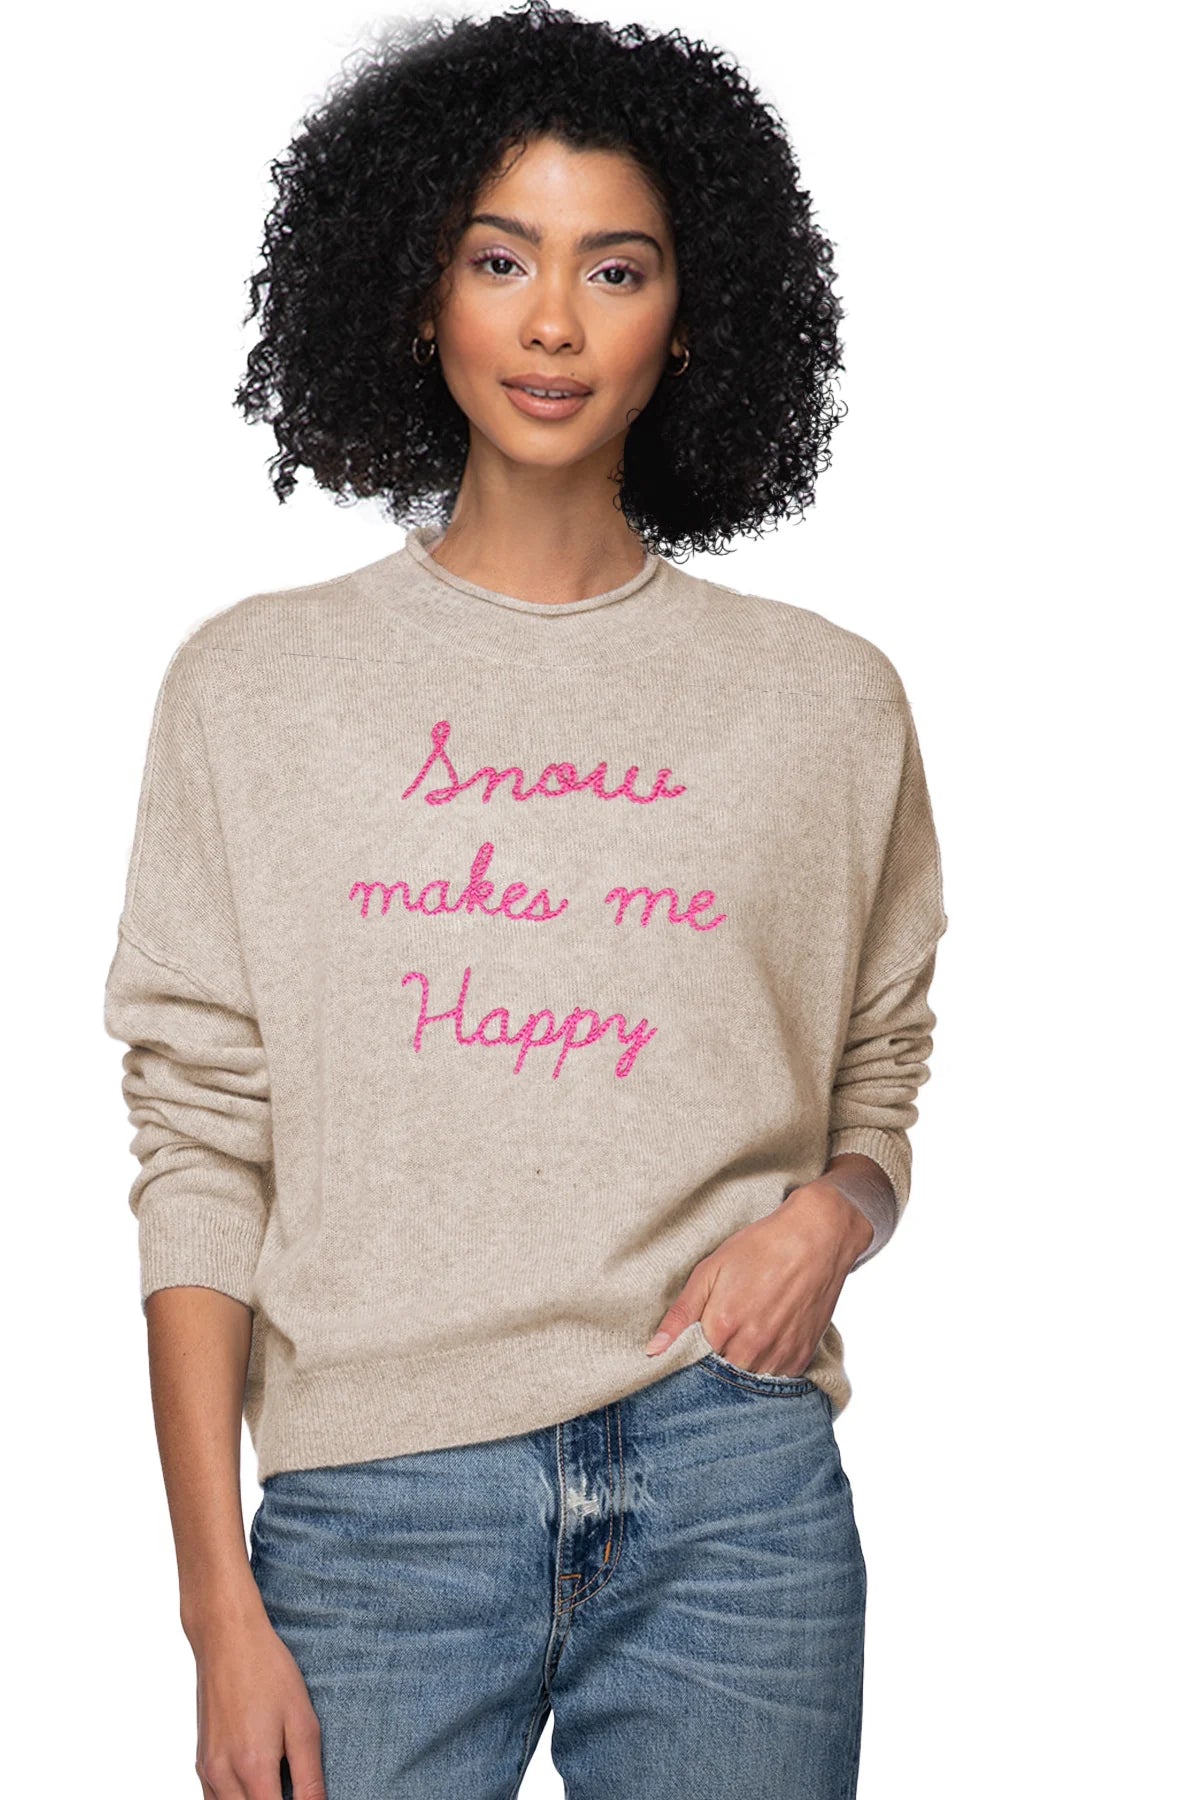 Snow Makes Me Happy Sweater - Frock Shop